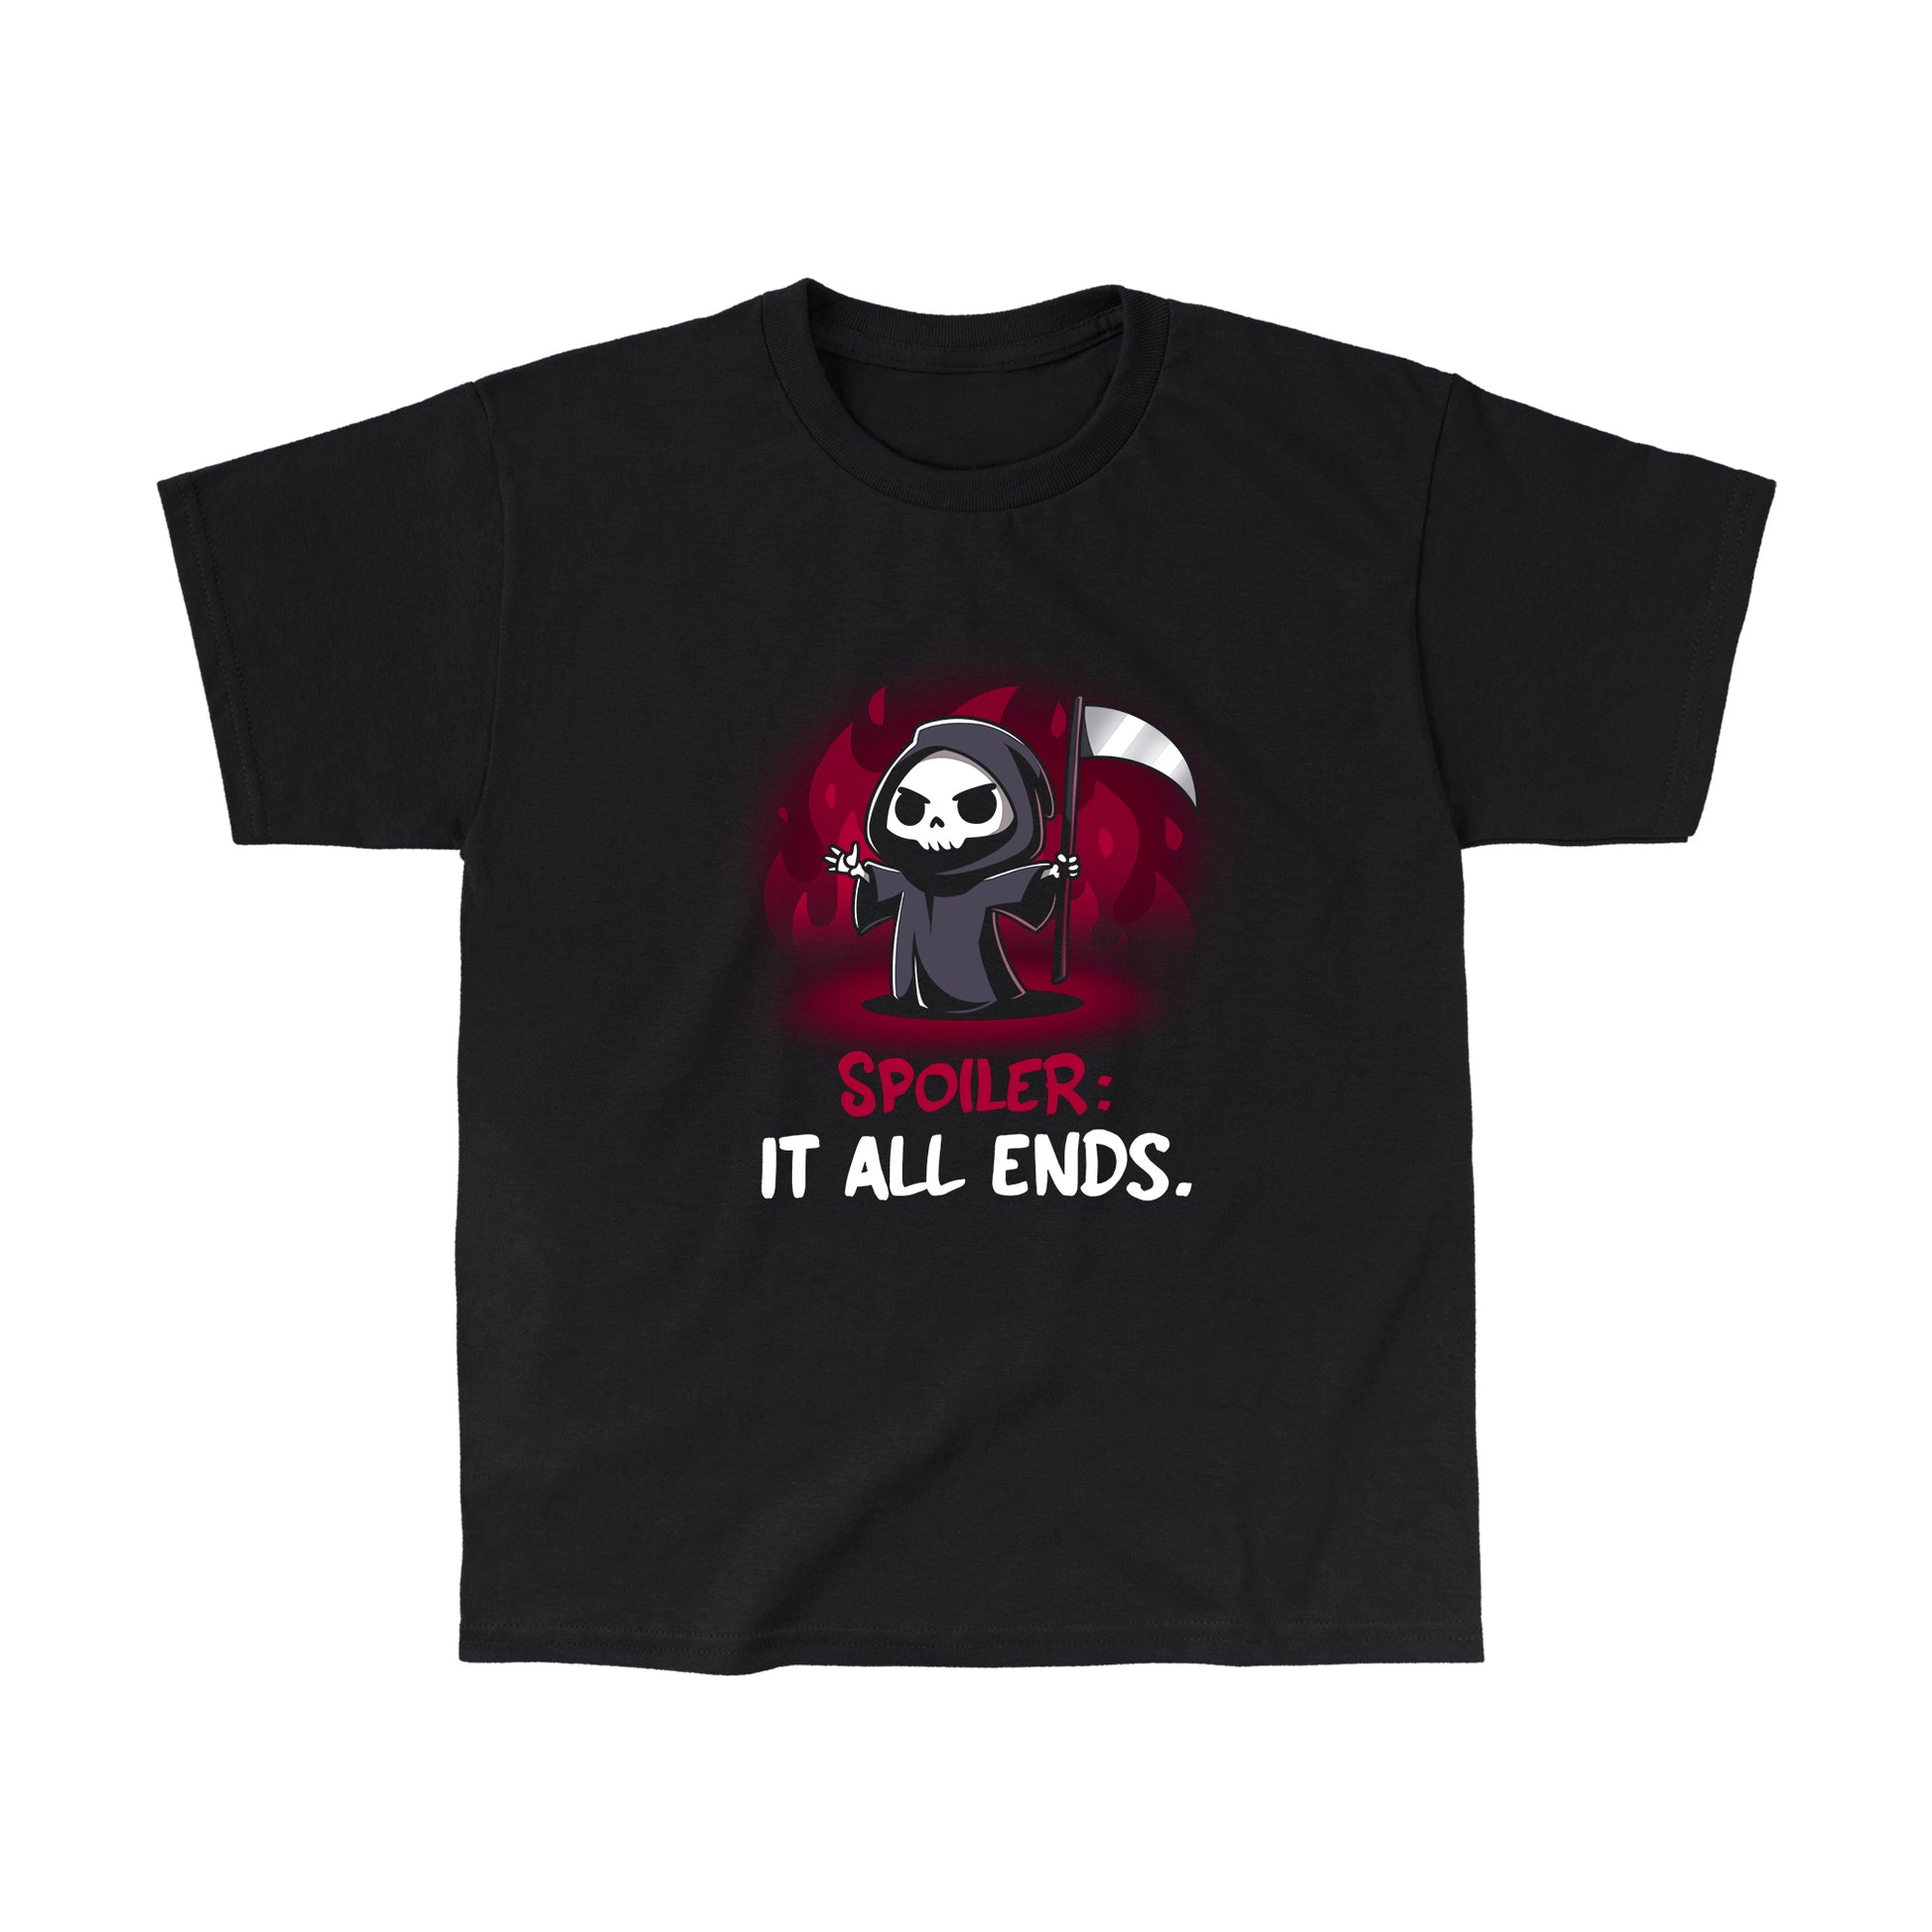 Classic Cotton T-shirt_TeeTurtle Spoiler: It All Ends. black t-shirt featuring a dark and dangerous Grim Reaper in front of red flames.